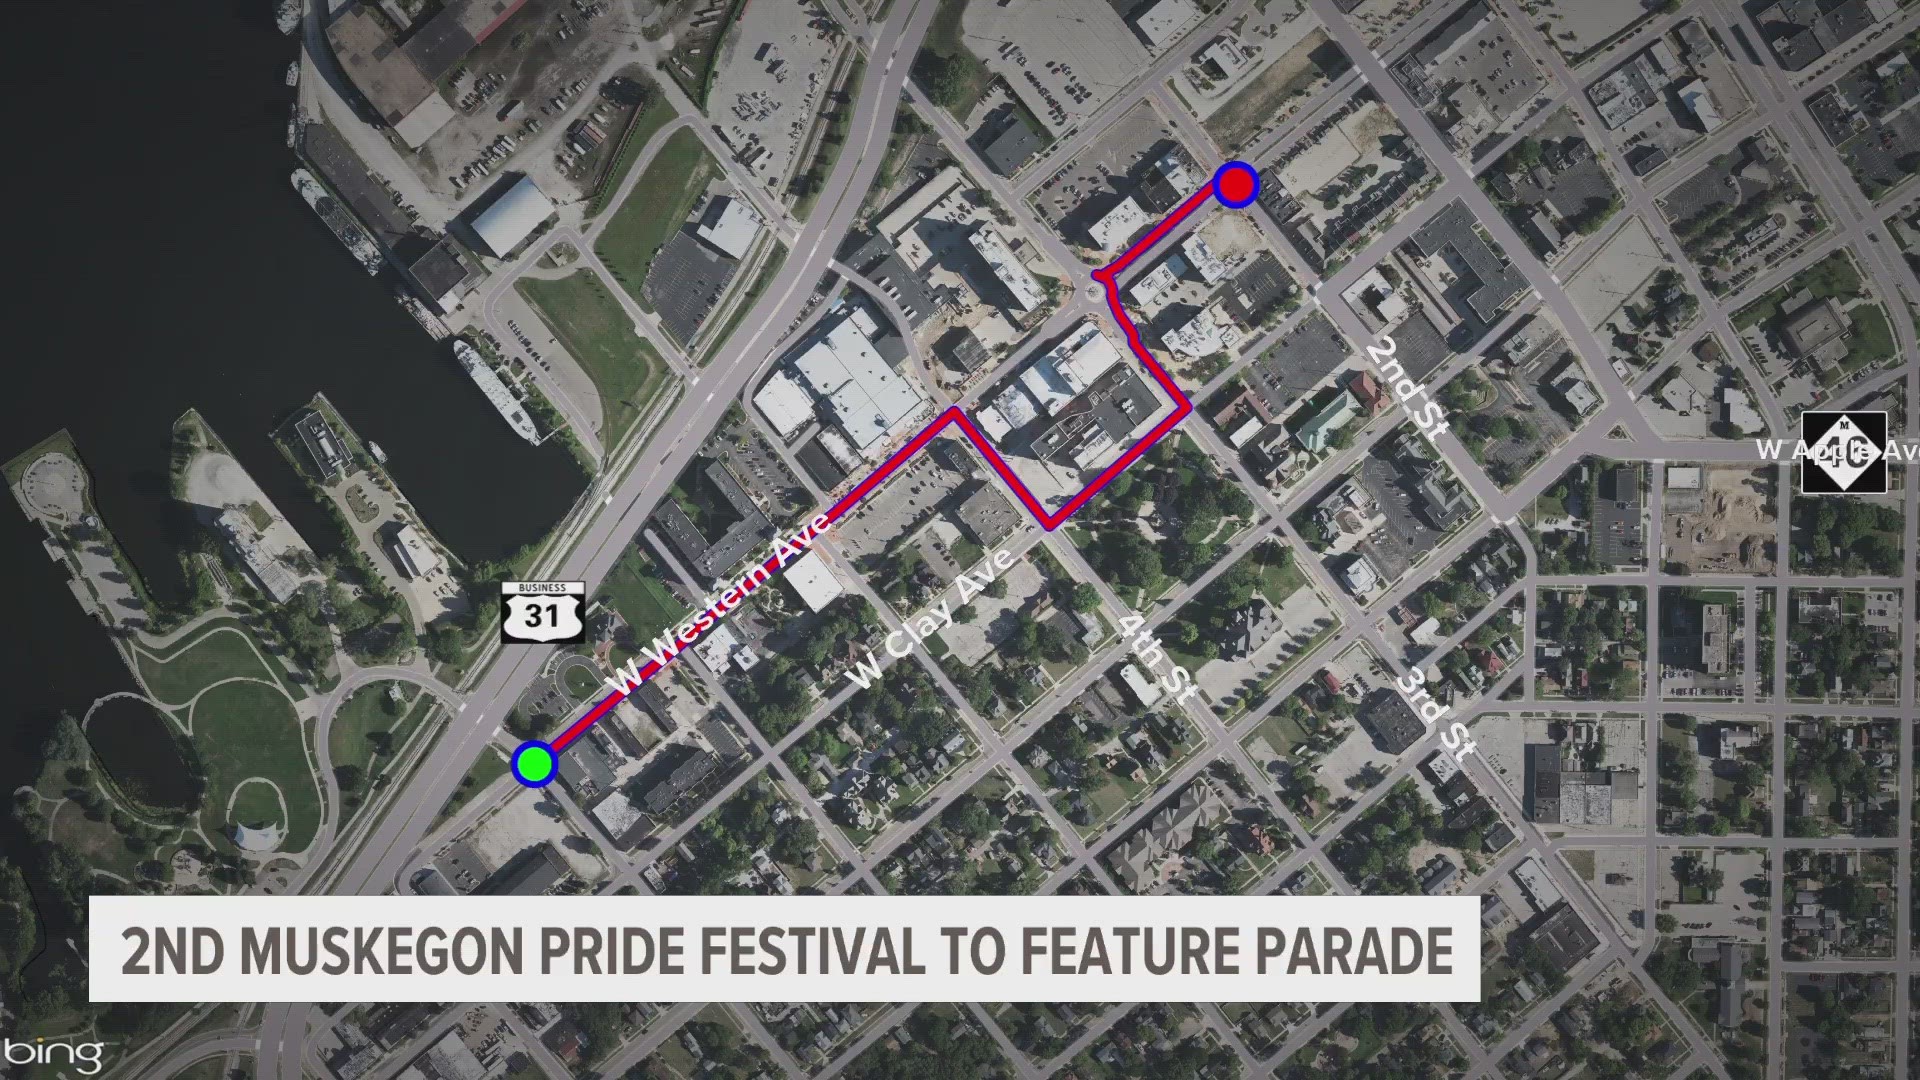 The parade will start Saturday, June 3 at 10:30 a.m. near 7th Street and Western Avenue, then end at Western and 2nd Street in Muskegon.